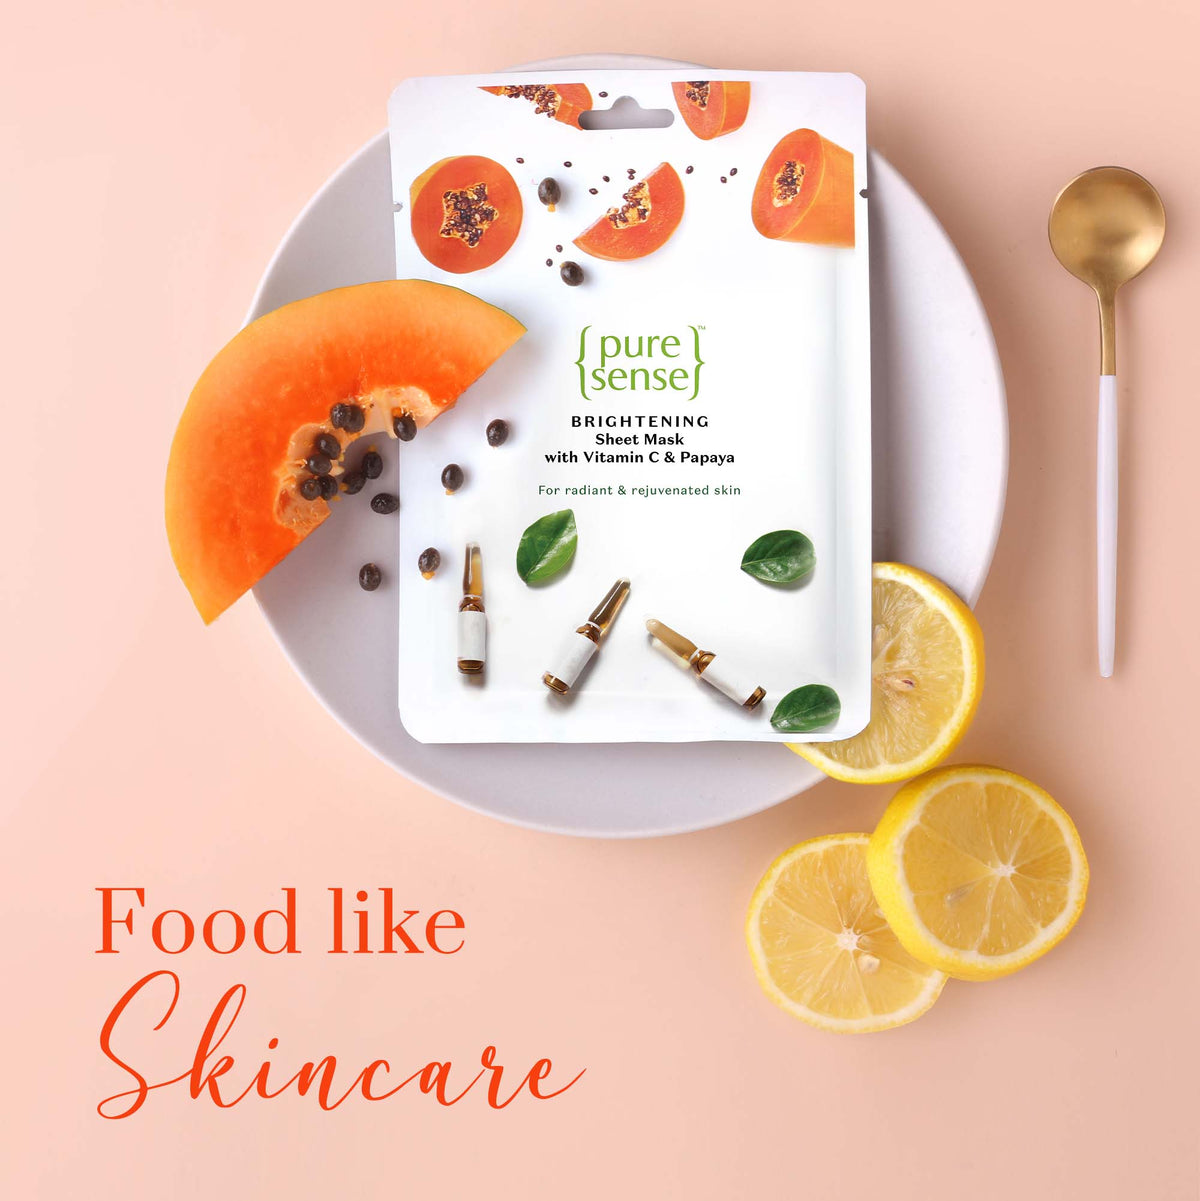 Brightening Sheet Mask with Vitamin C & Papaya | From the makers of Parachute Advansed | 15ml